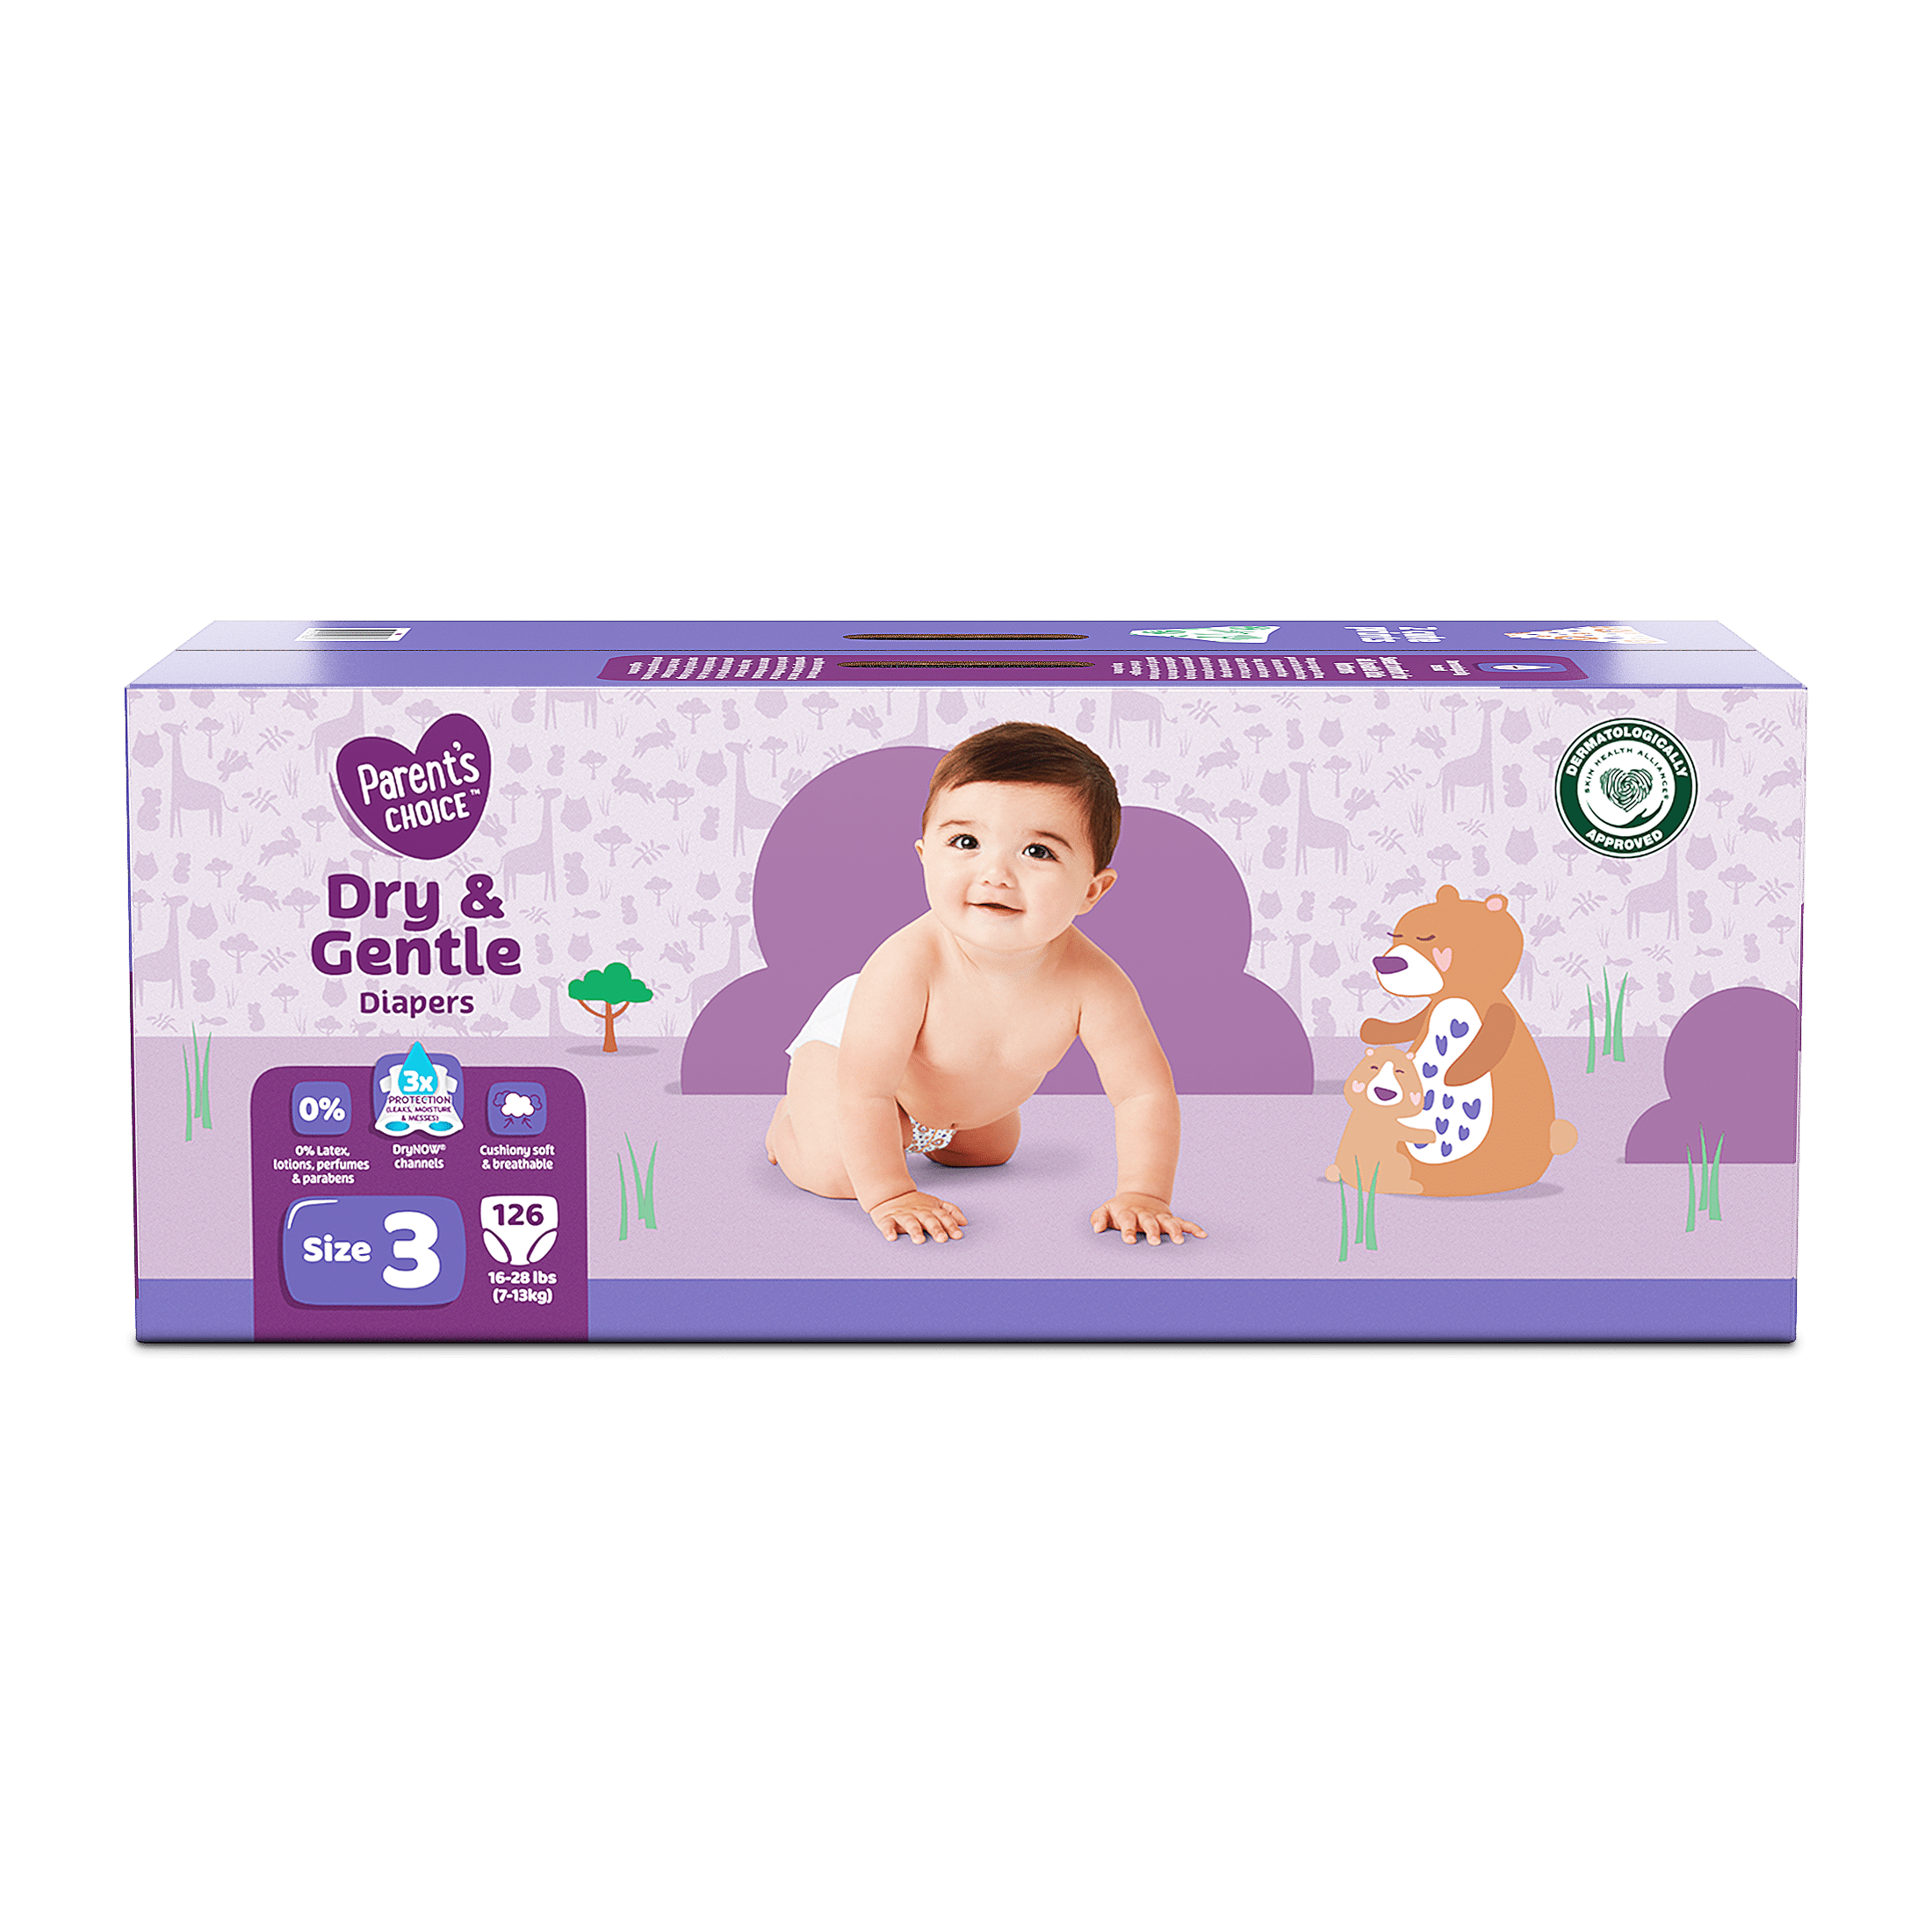 Parent's Choice Dry & Gentle Diapers Size 3, 126 Count 